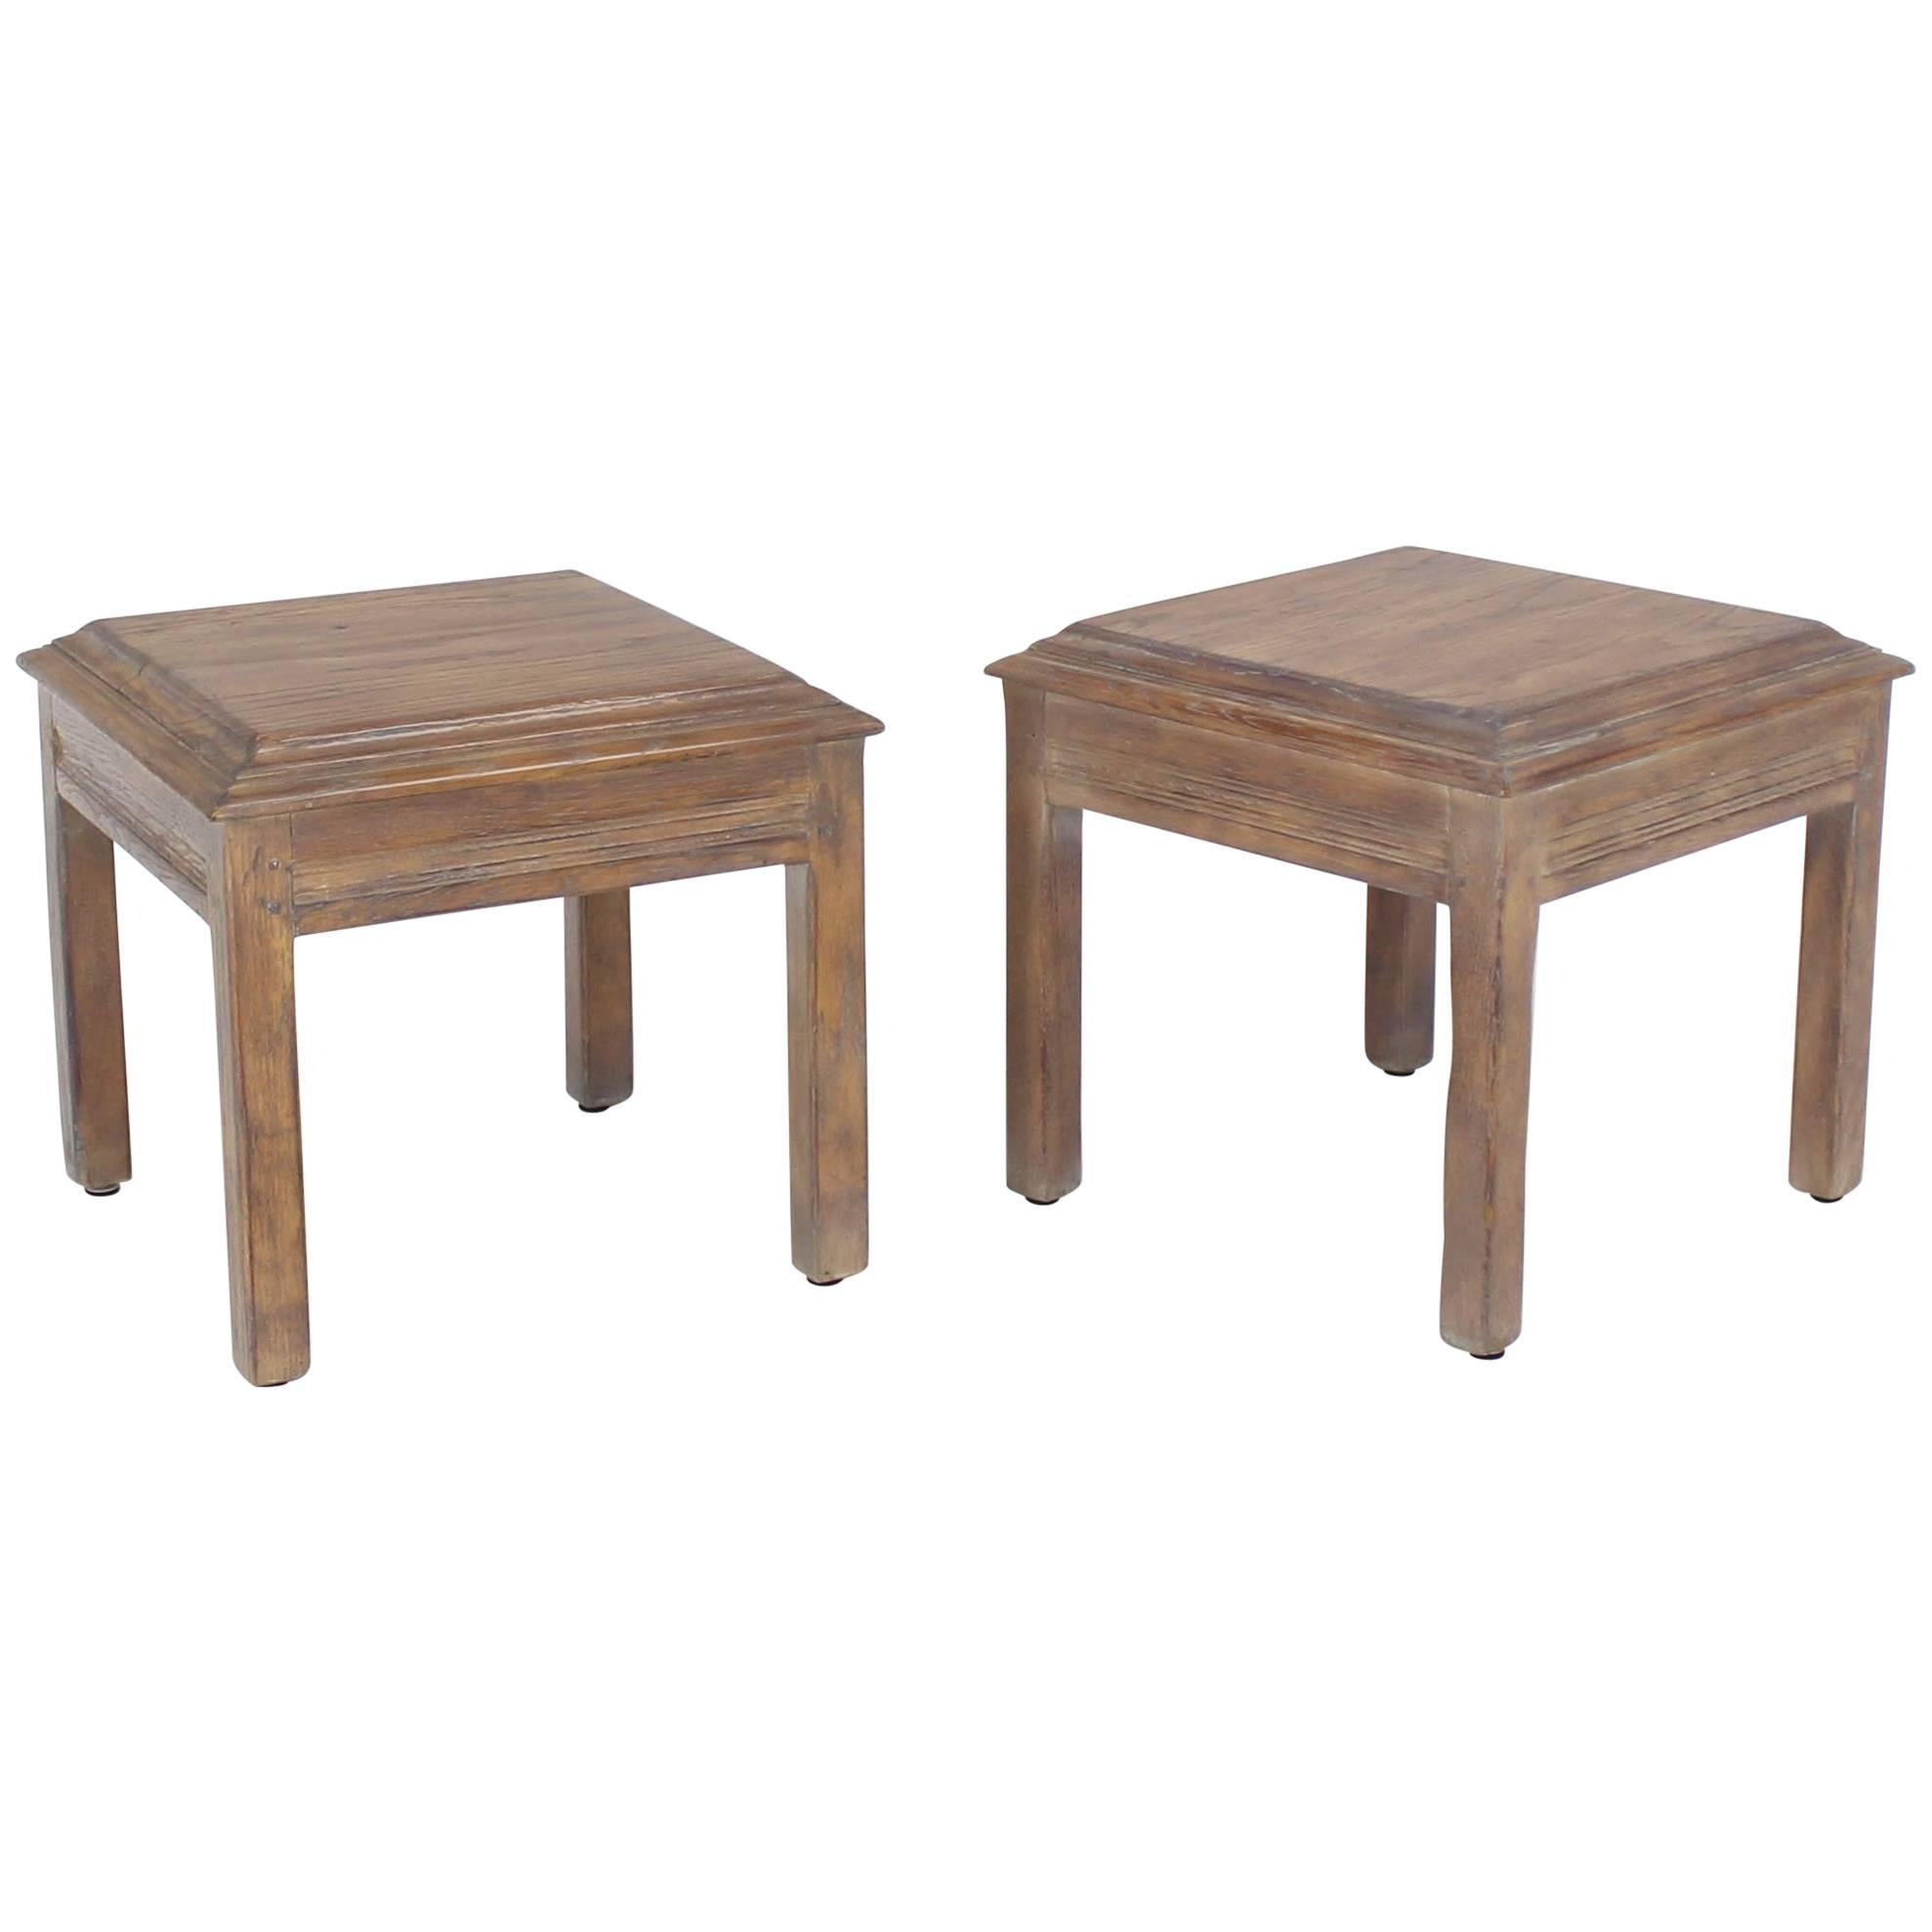 Pair of Solid Oak Cerused Pickled White Wash Square End Tables